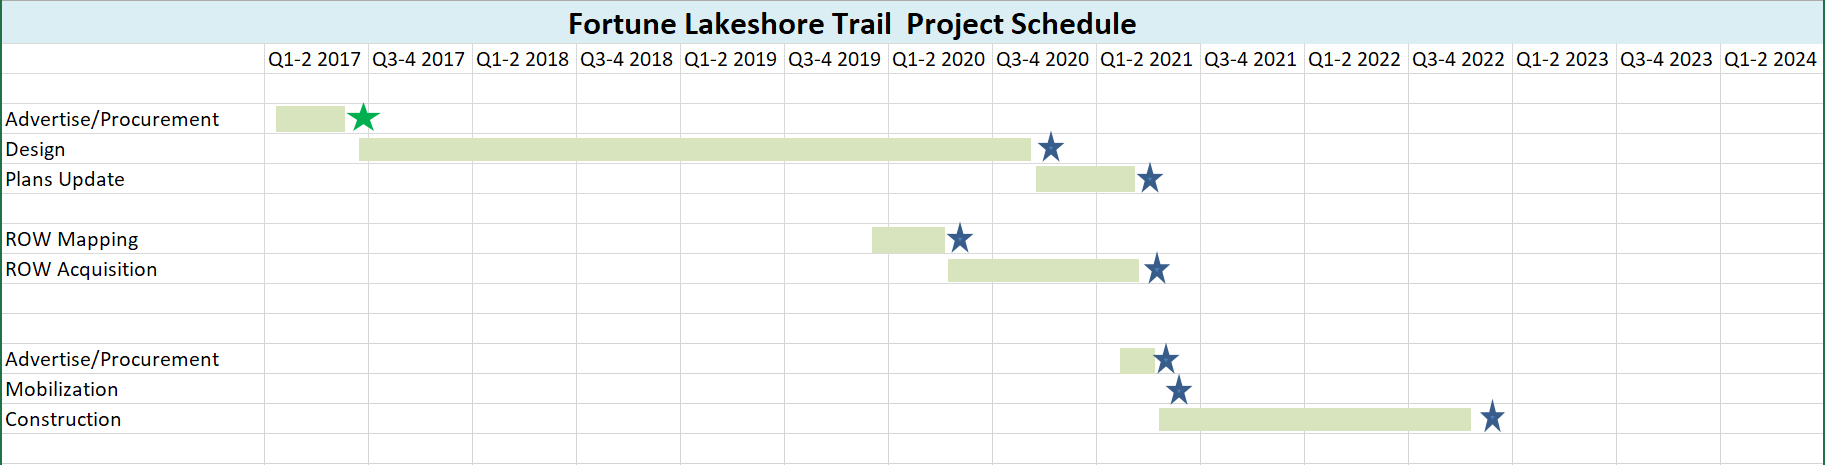 Fortune Lakeshore Trail Project Schedule